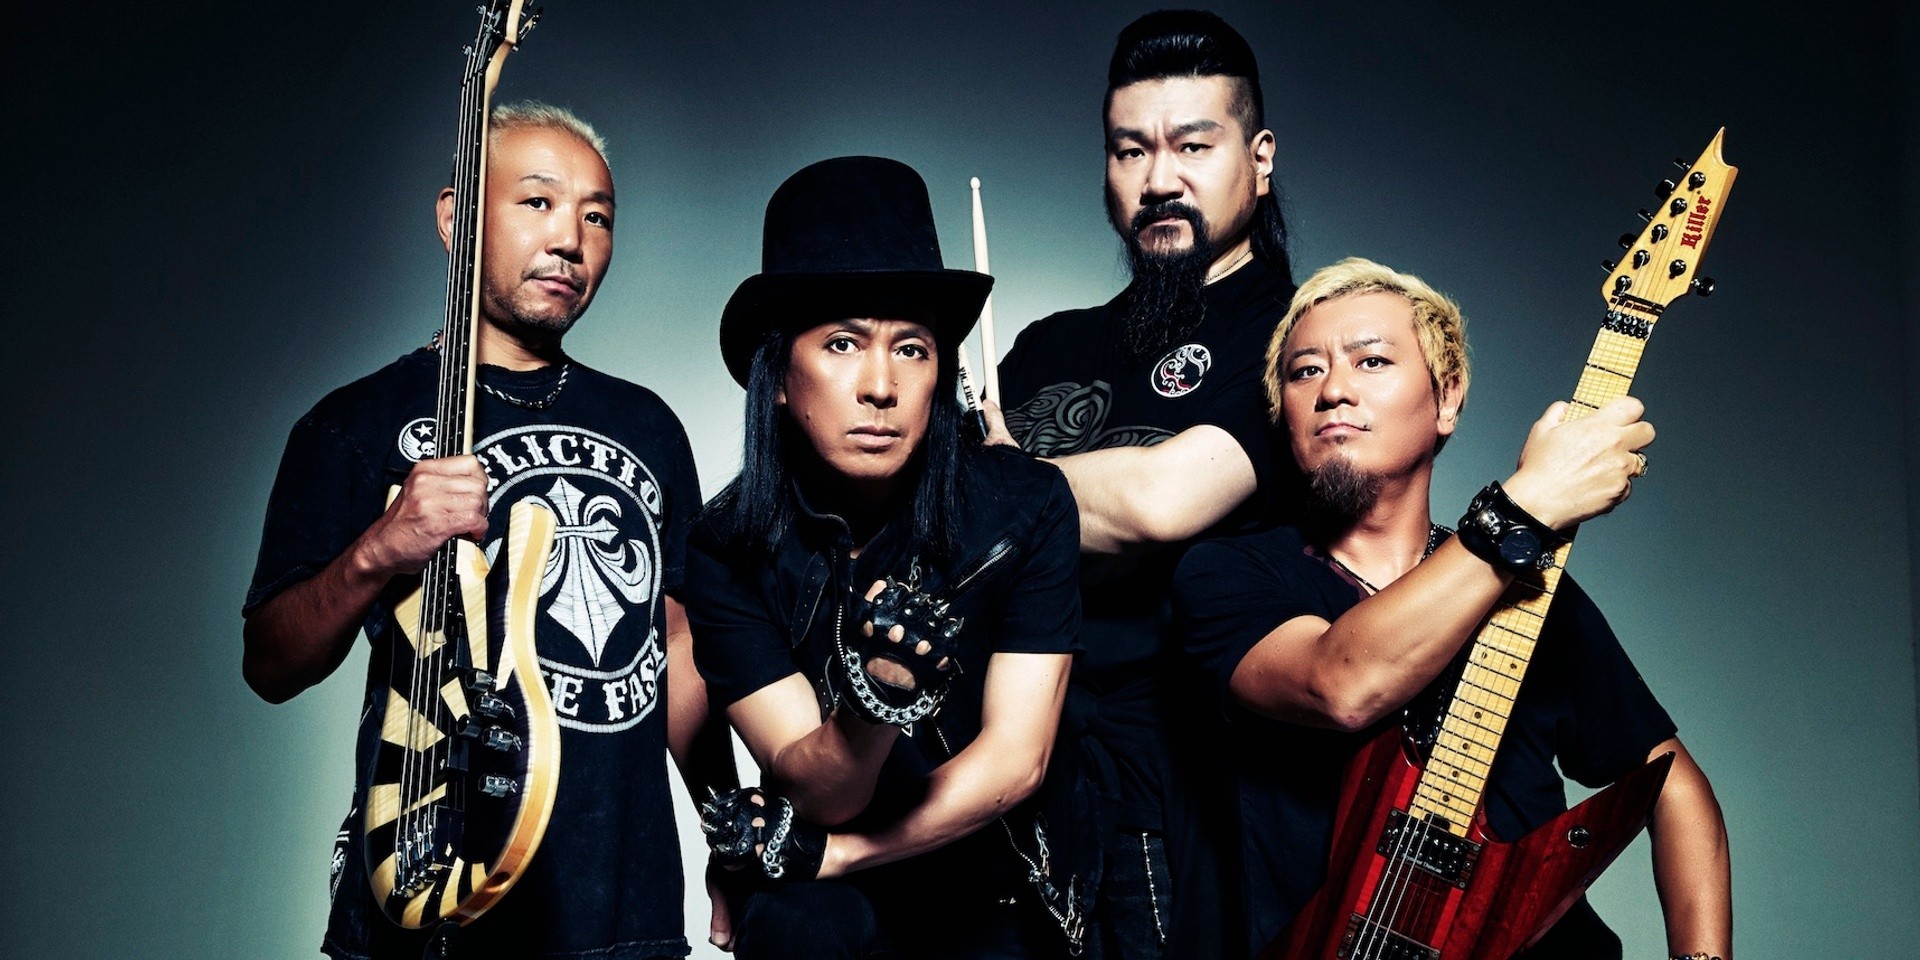 Japanese heavy metal band Loudness to perform in Singapore this June